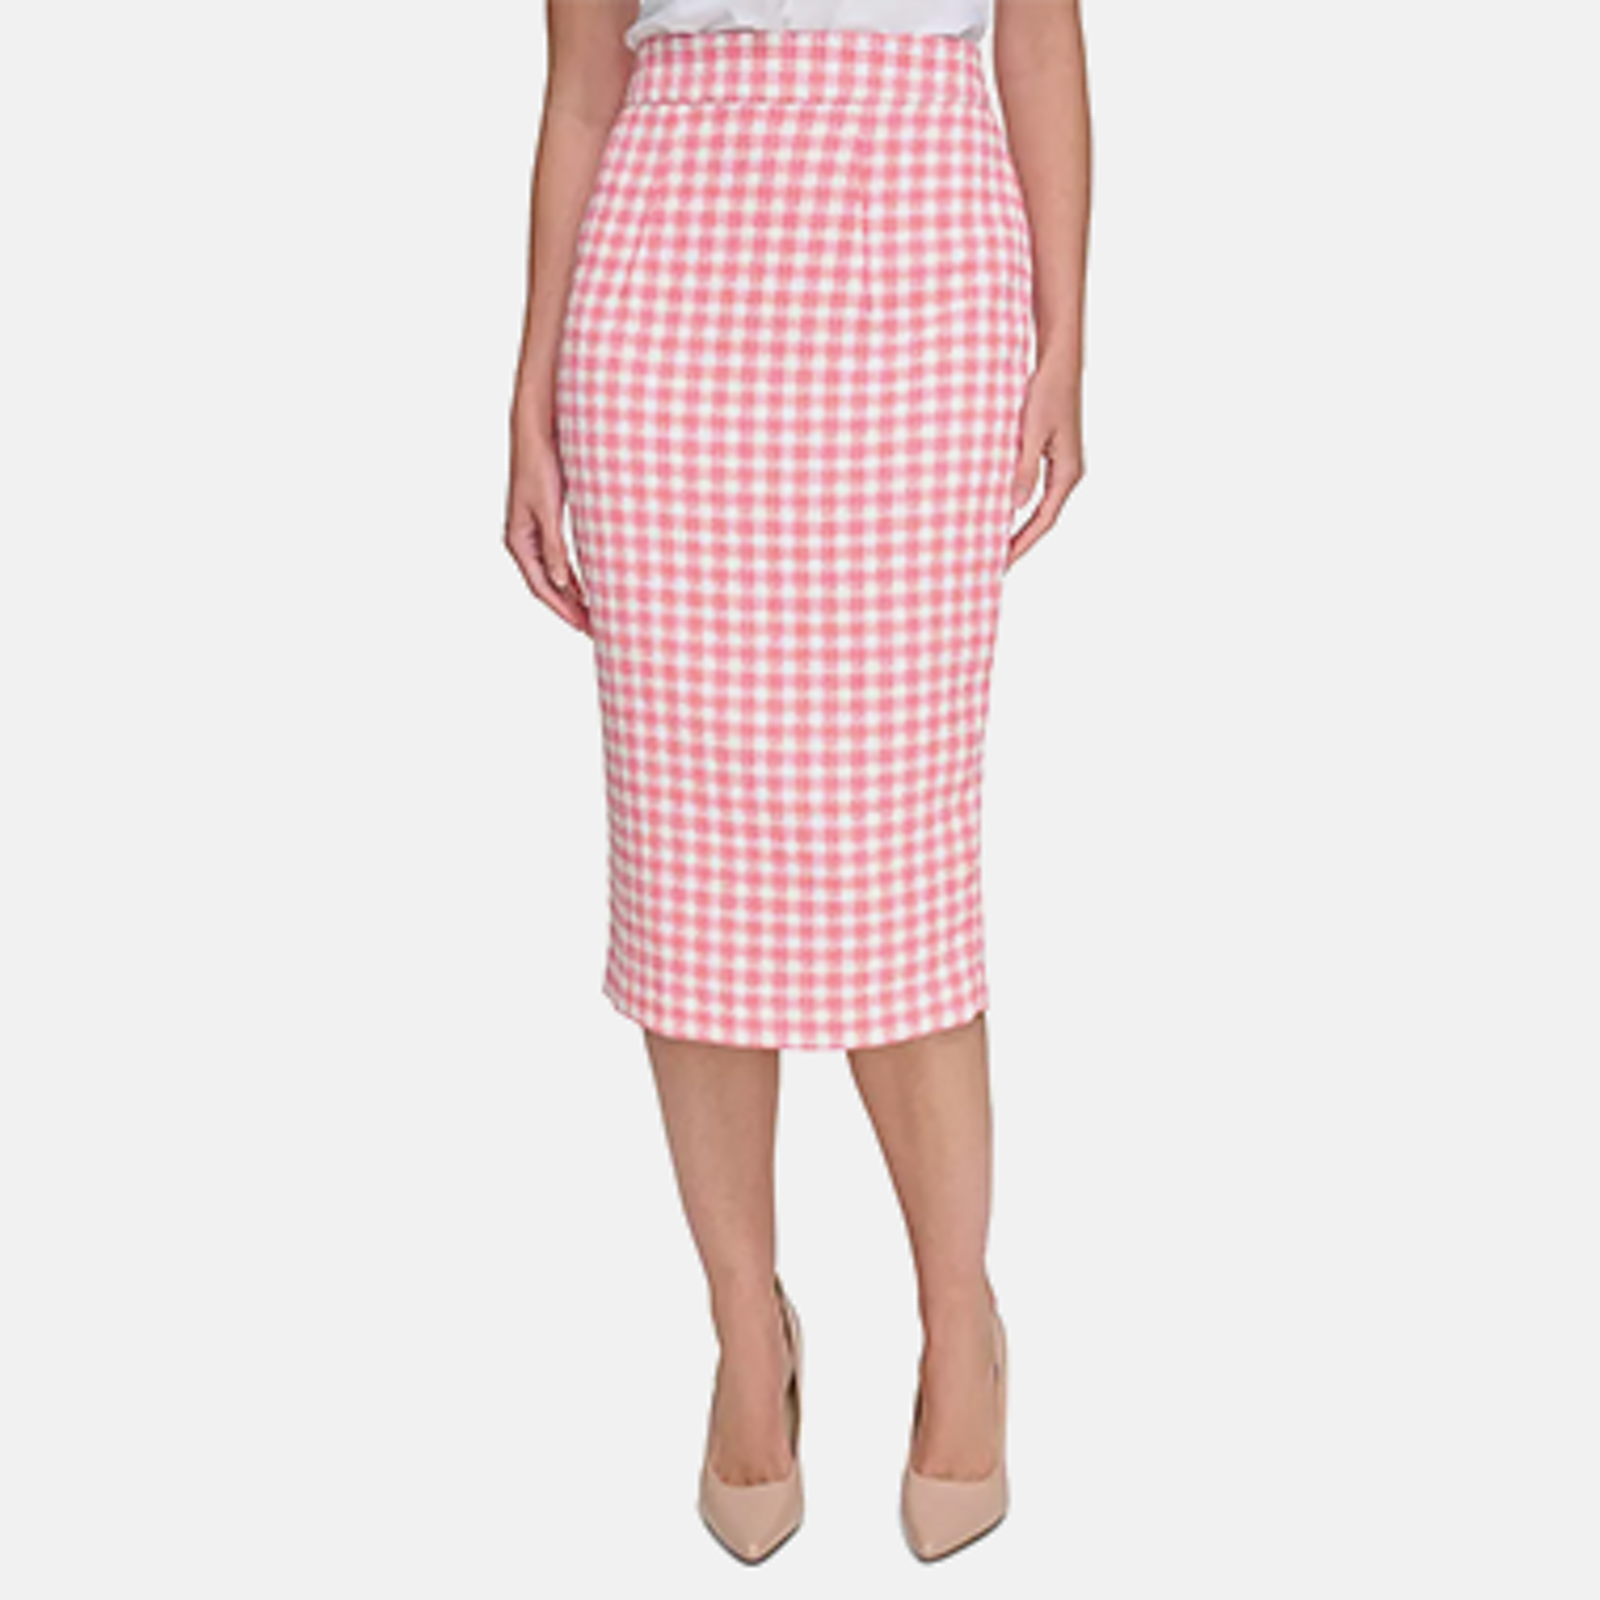 A-line Skirts - Buy A-line Skirts Online Starting at Just ₹161